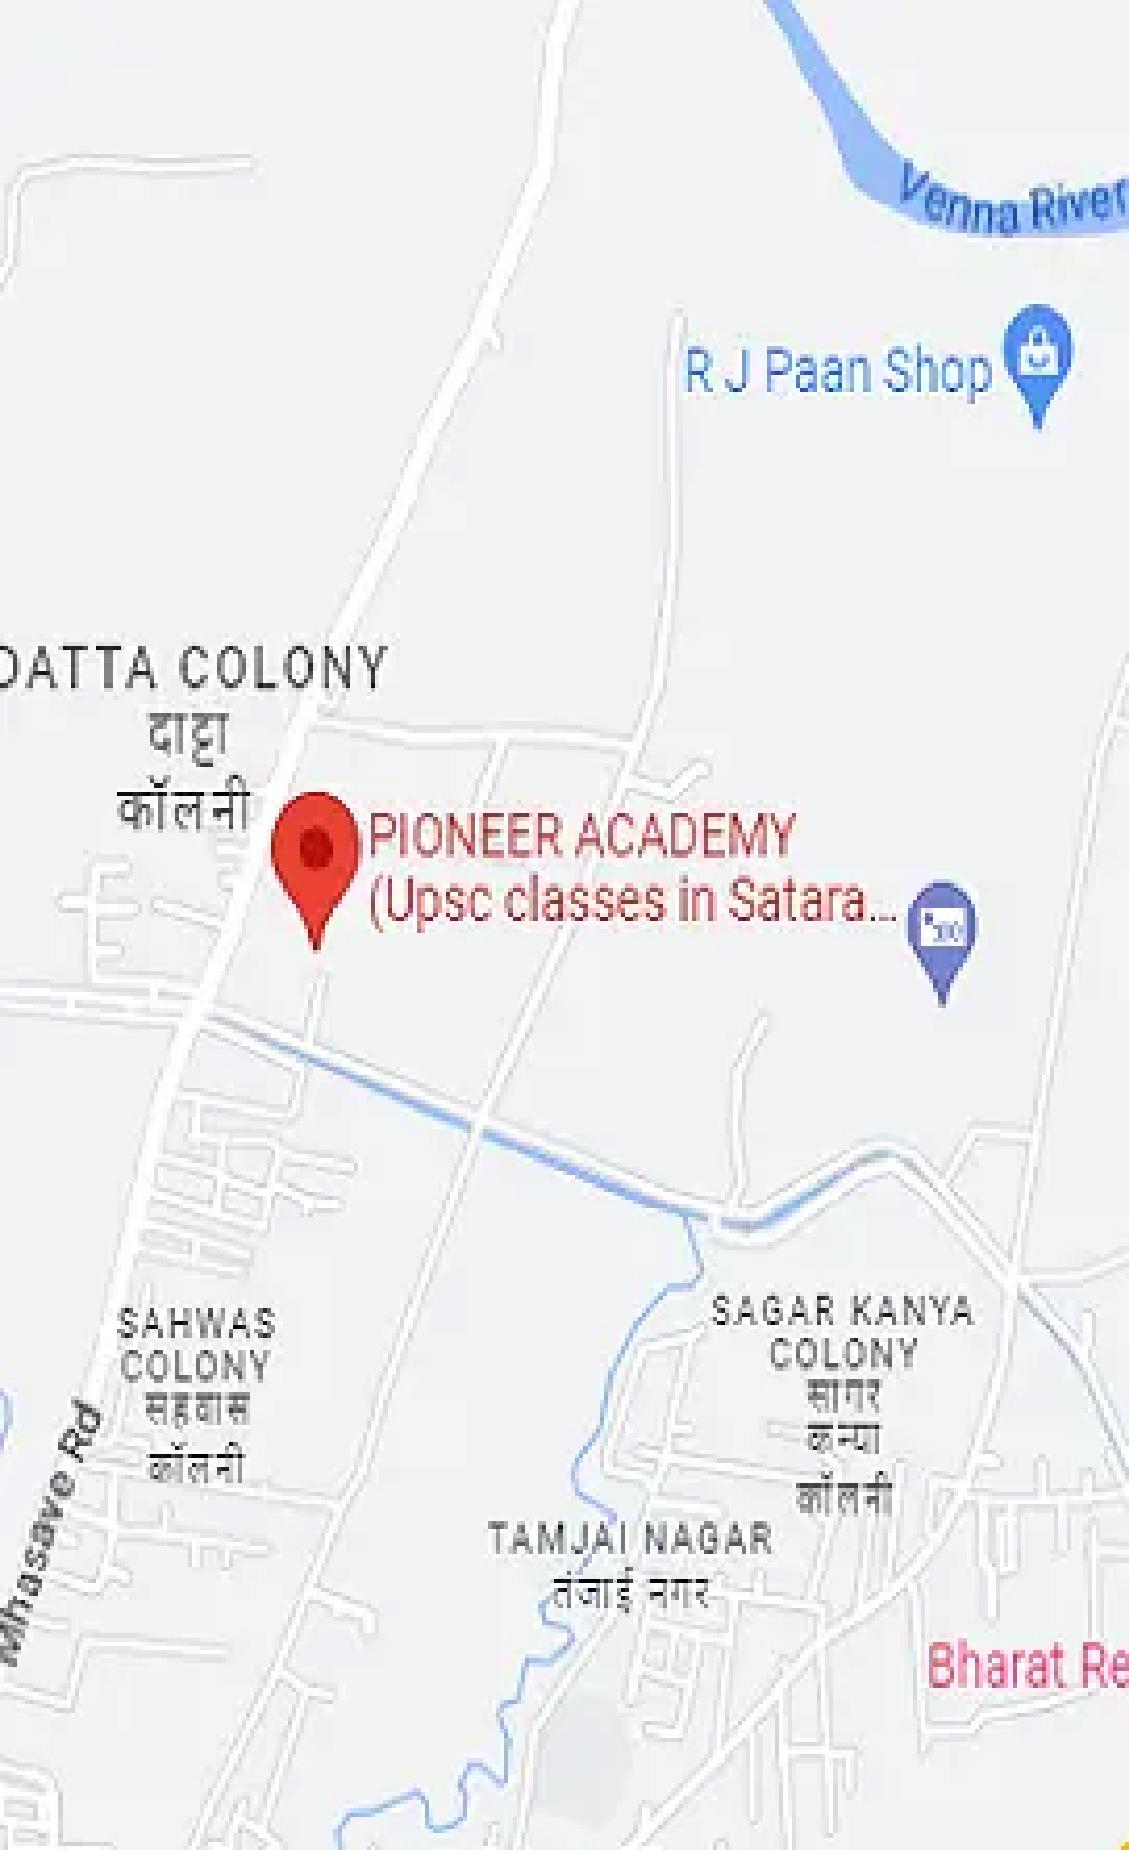 Reach out to Pioneer Academy in Satara